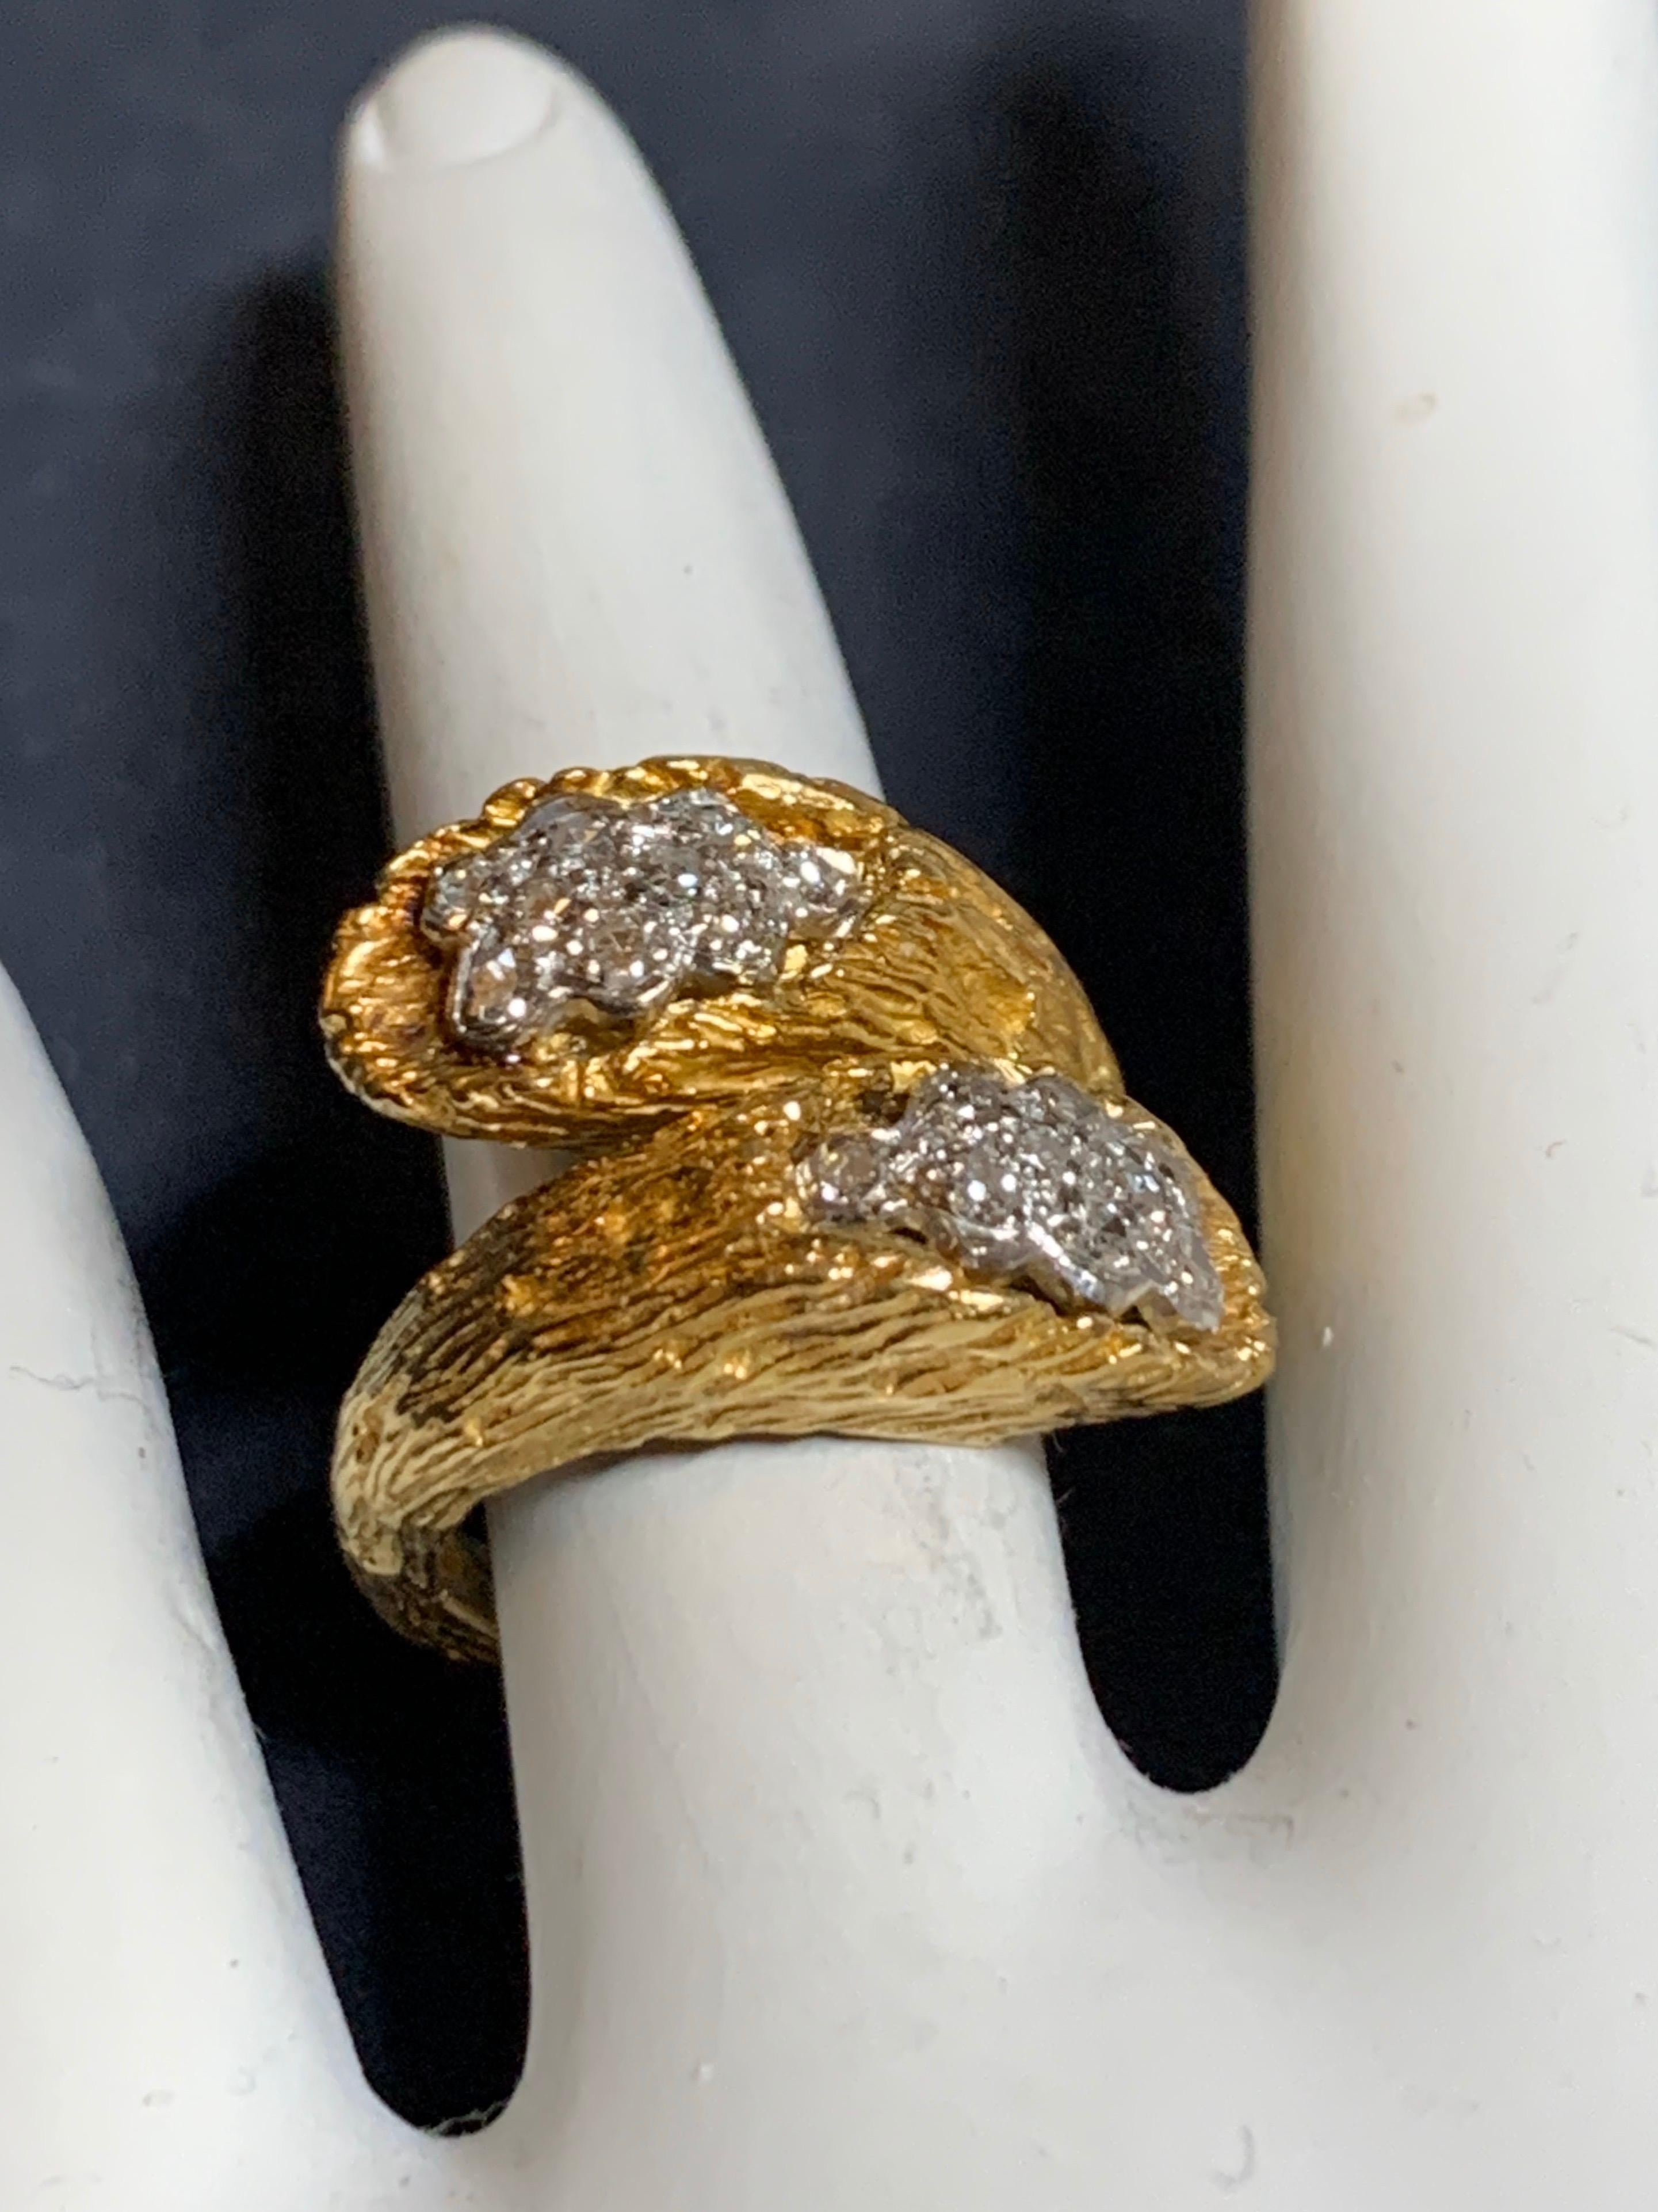 Retro Gold Cocktail Ring 0.35 Natural Single Cut Colorless Diamond, circa 1950 In Good Condition For Sale In Los Angeles, CA